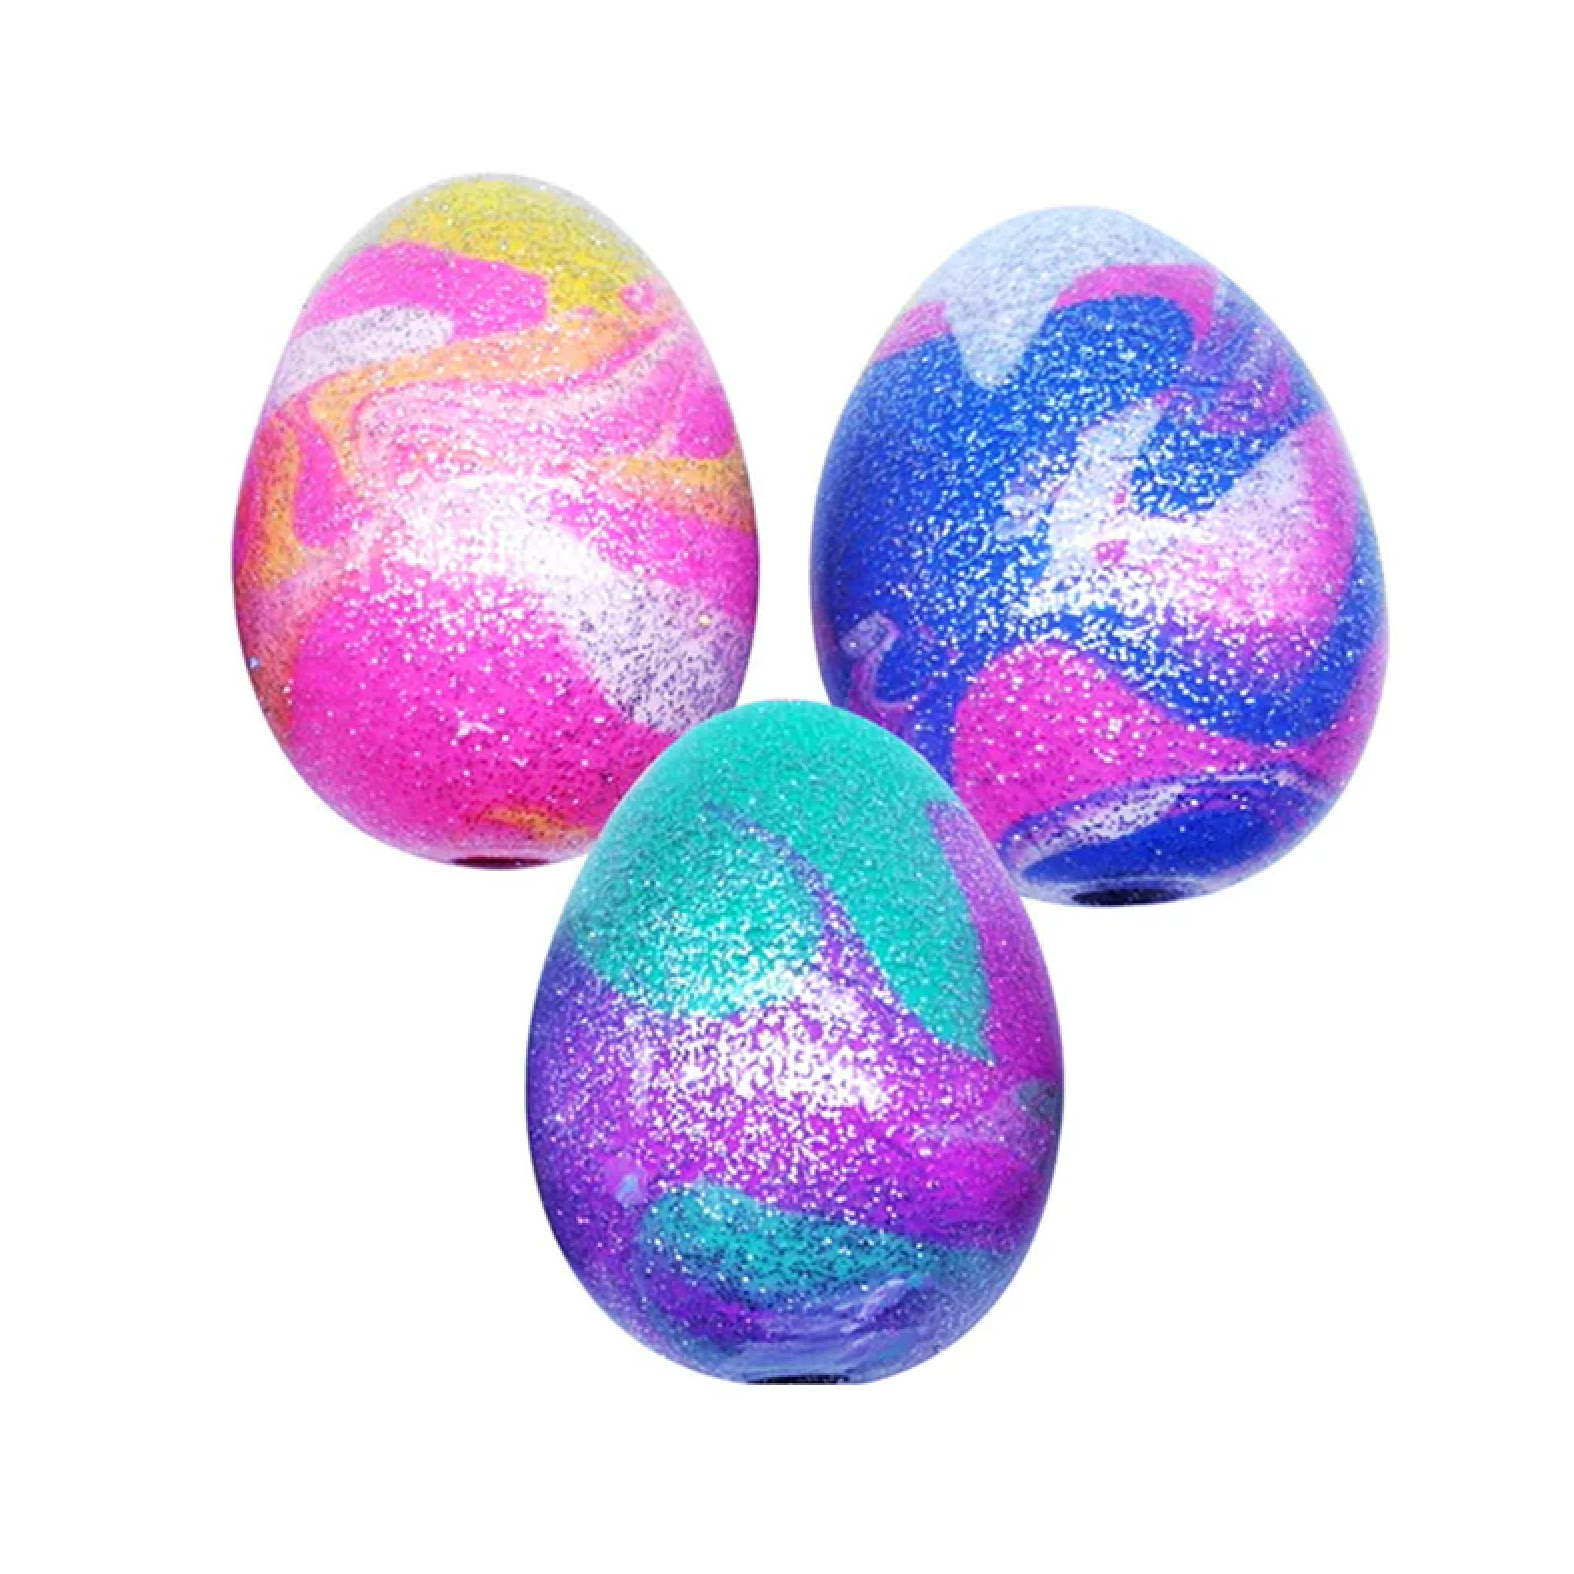 Schylling NeeDoh Mellow Marble Eggs - Swirly Decorated Eggs You Can Squish!-SCHYLLING-Little Giant Kidz